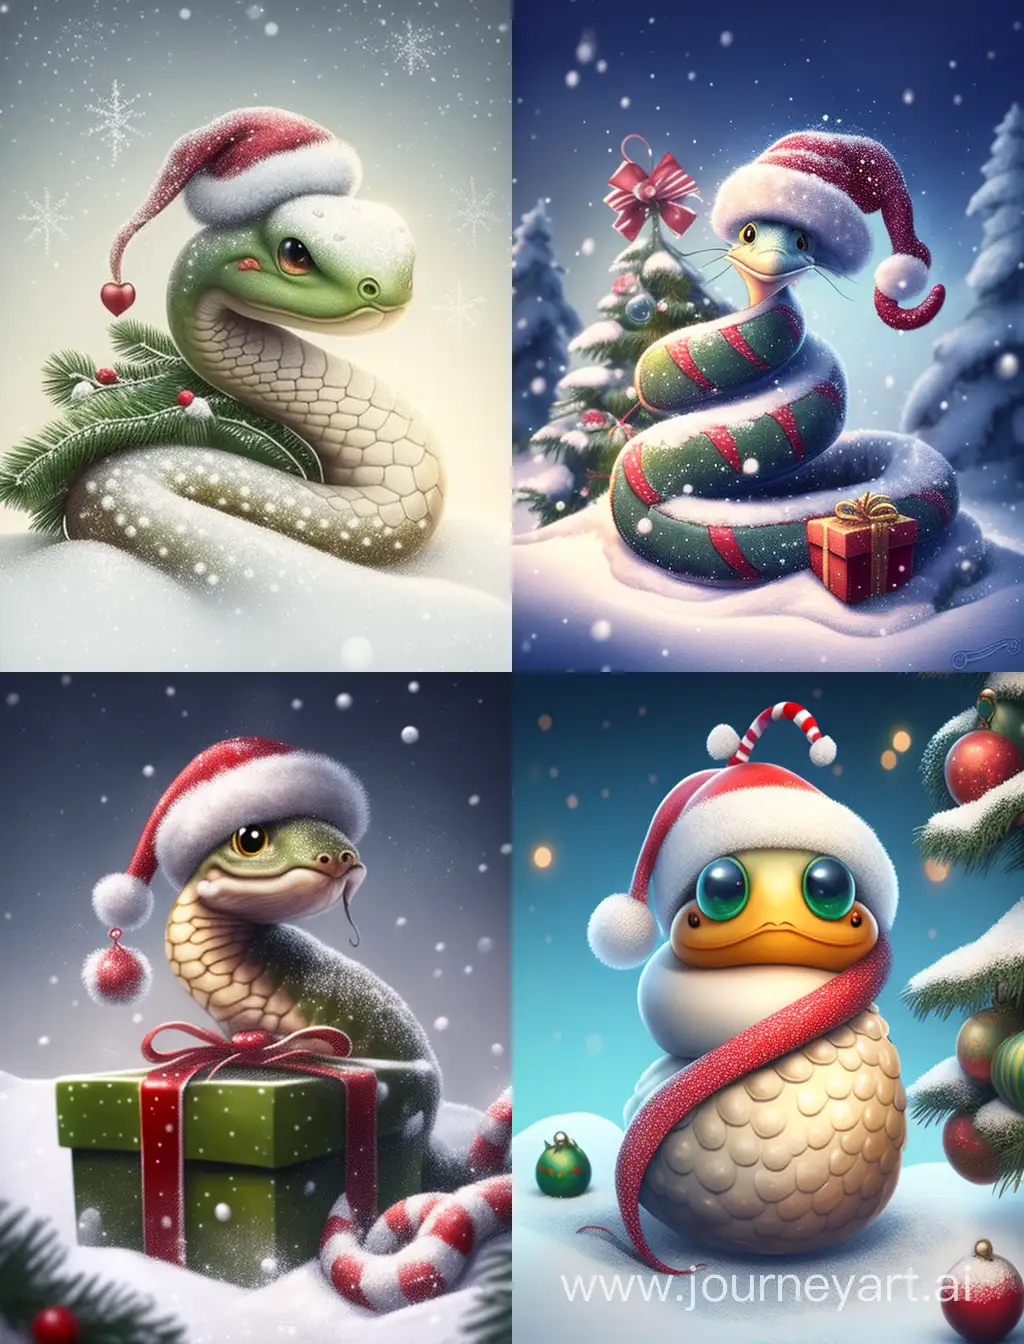 A sweet, kind Snake, the symbol of 2025, is sitting in a snowdrift in a Santa Claus hat. Around her are many Christmas presents and balls on the tree. Light background, snowflakes. It is snowing. The whole picture is in the style of Pixar